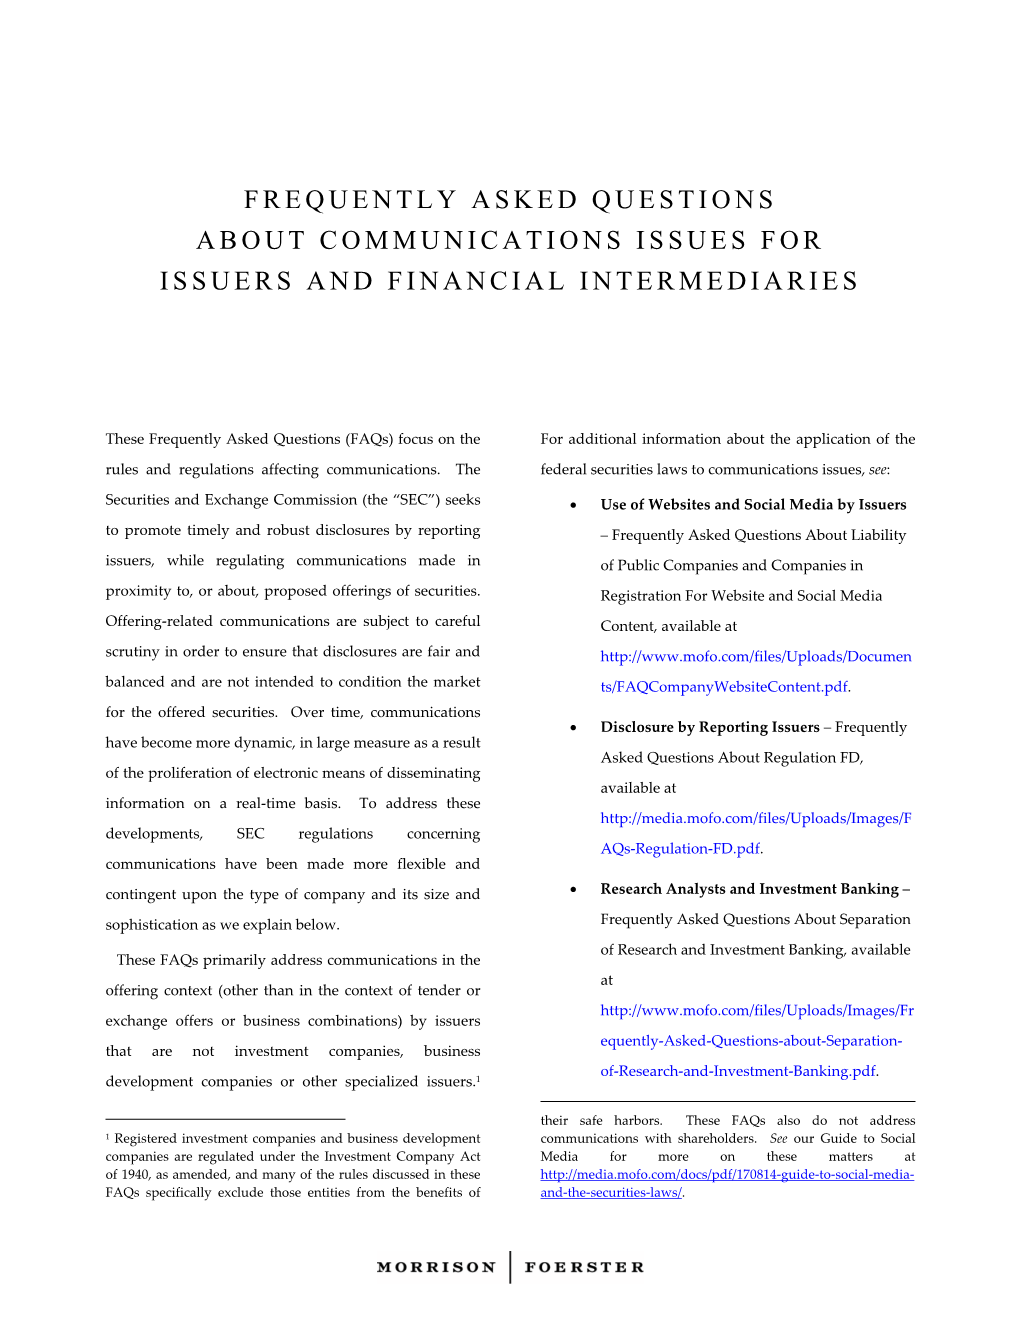 Frequently Asked Questions About Communications Issues for Issuers and Financial Intermediaries